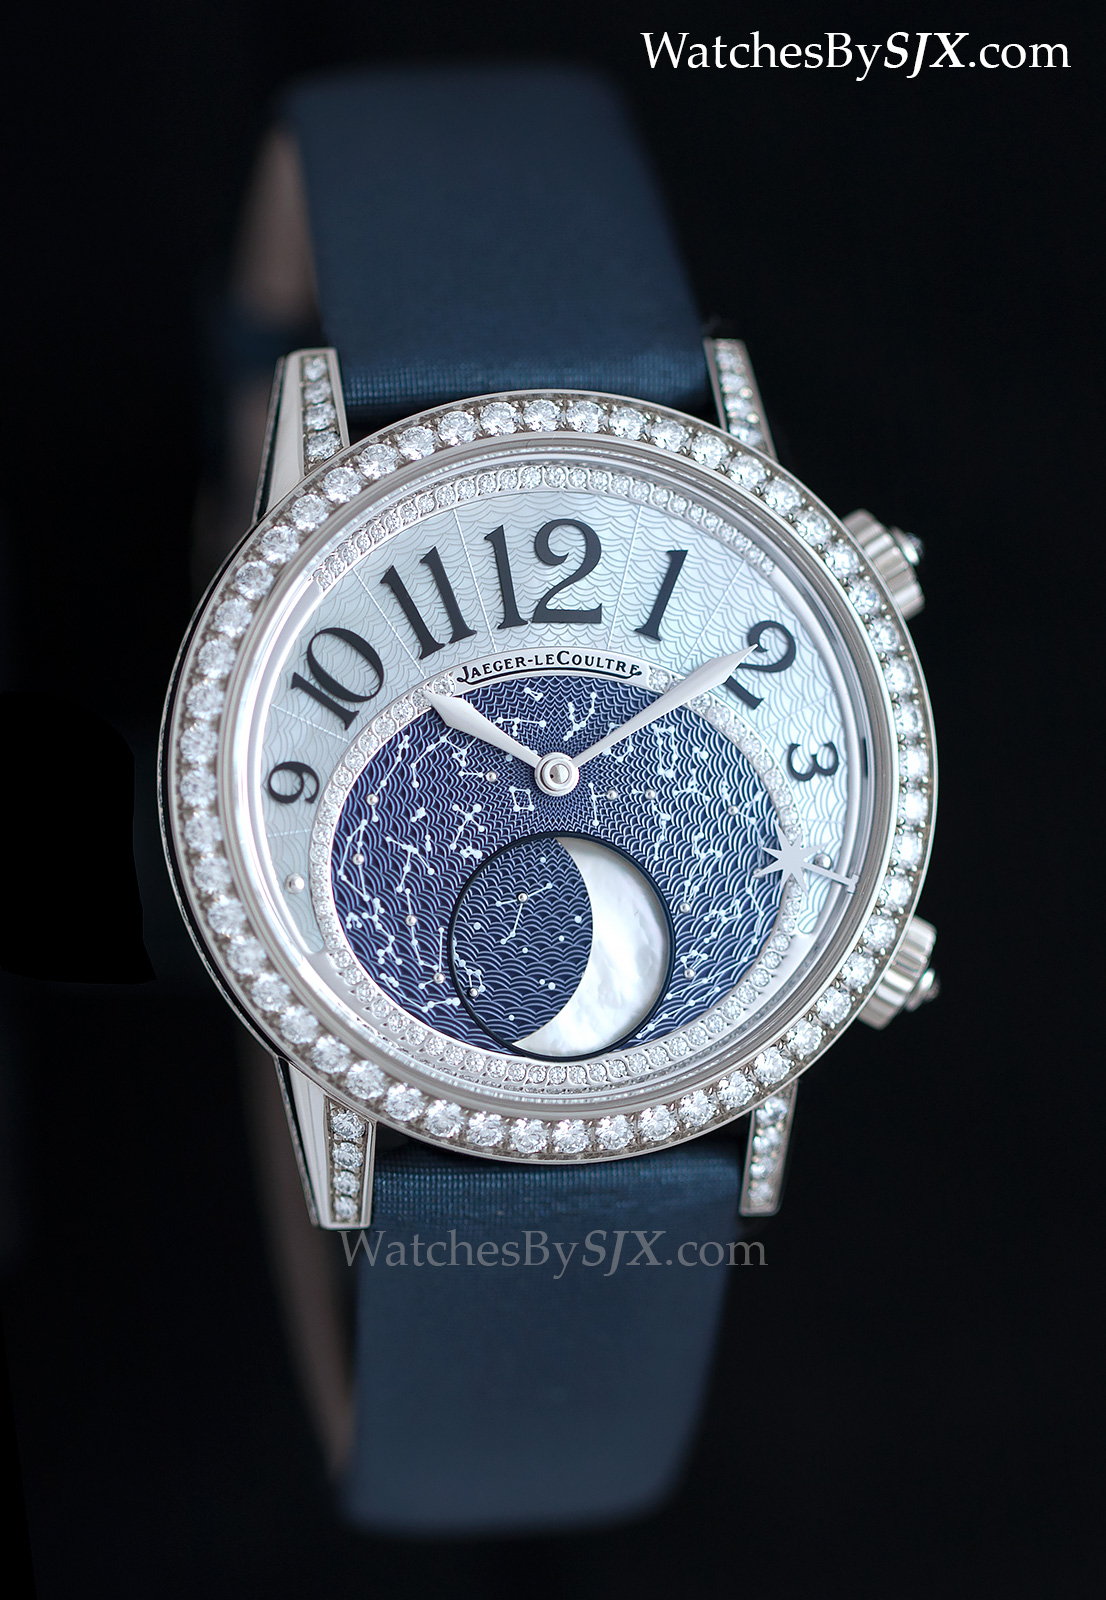 SIHH 2015 Roundup: Jaeger-LeCoultre – Everything You Need To Know, With ...